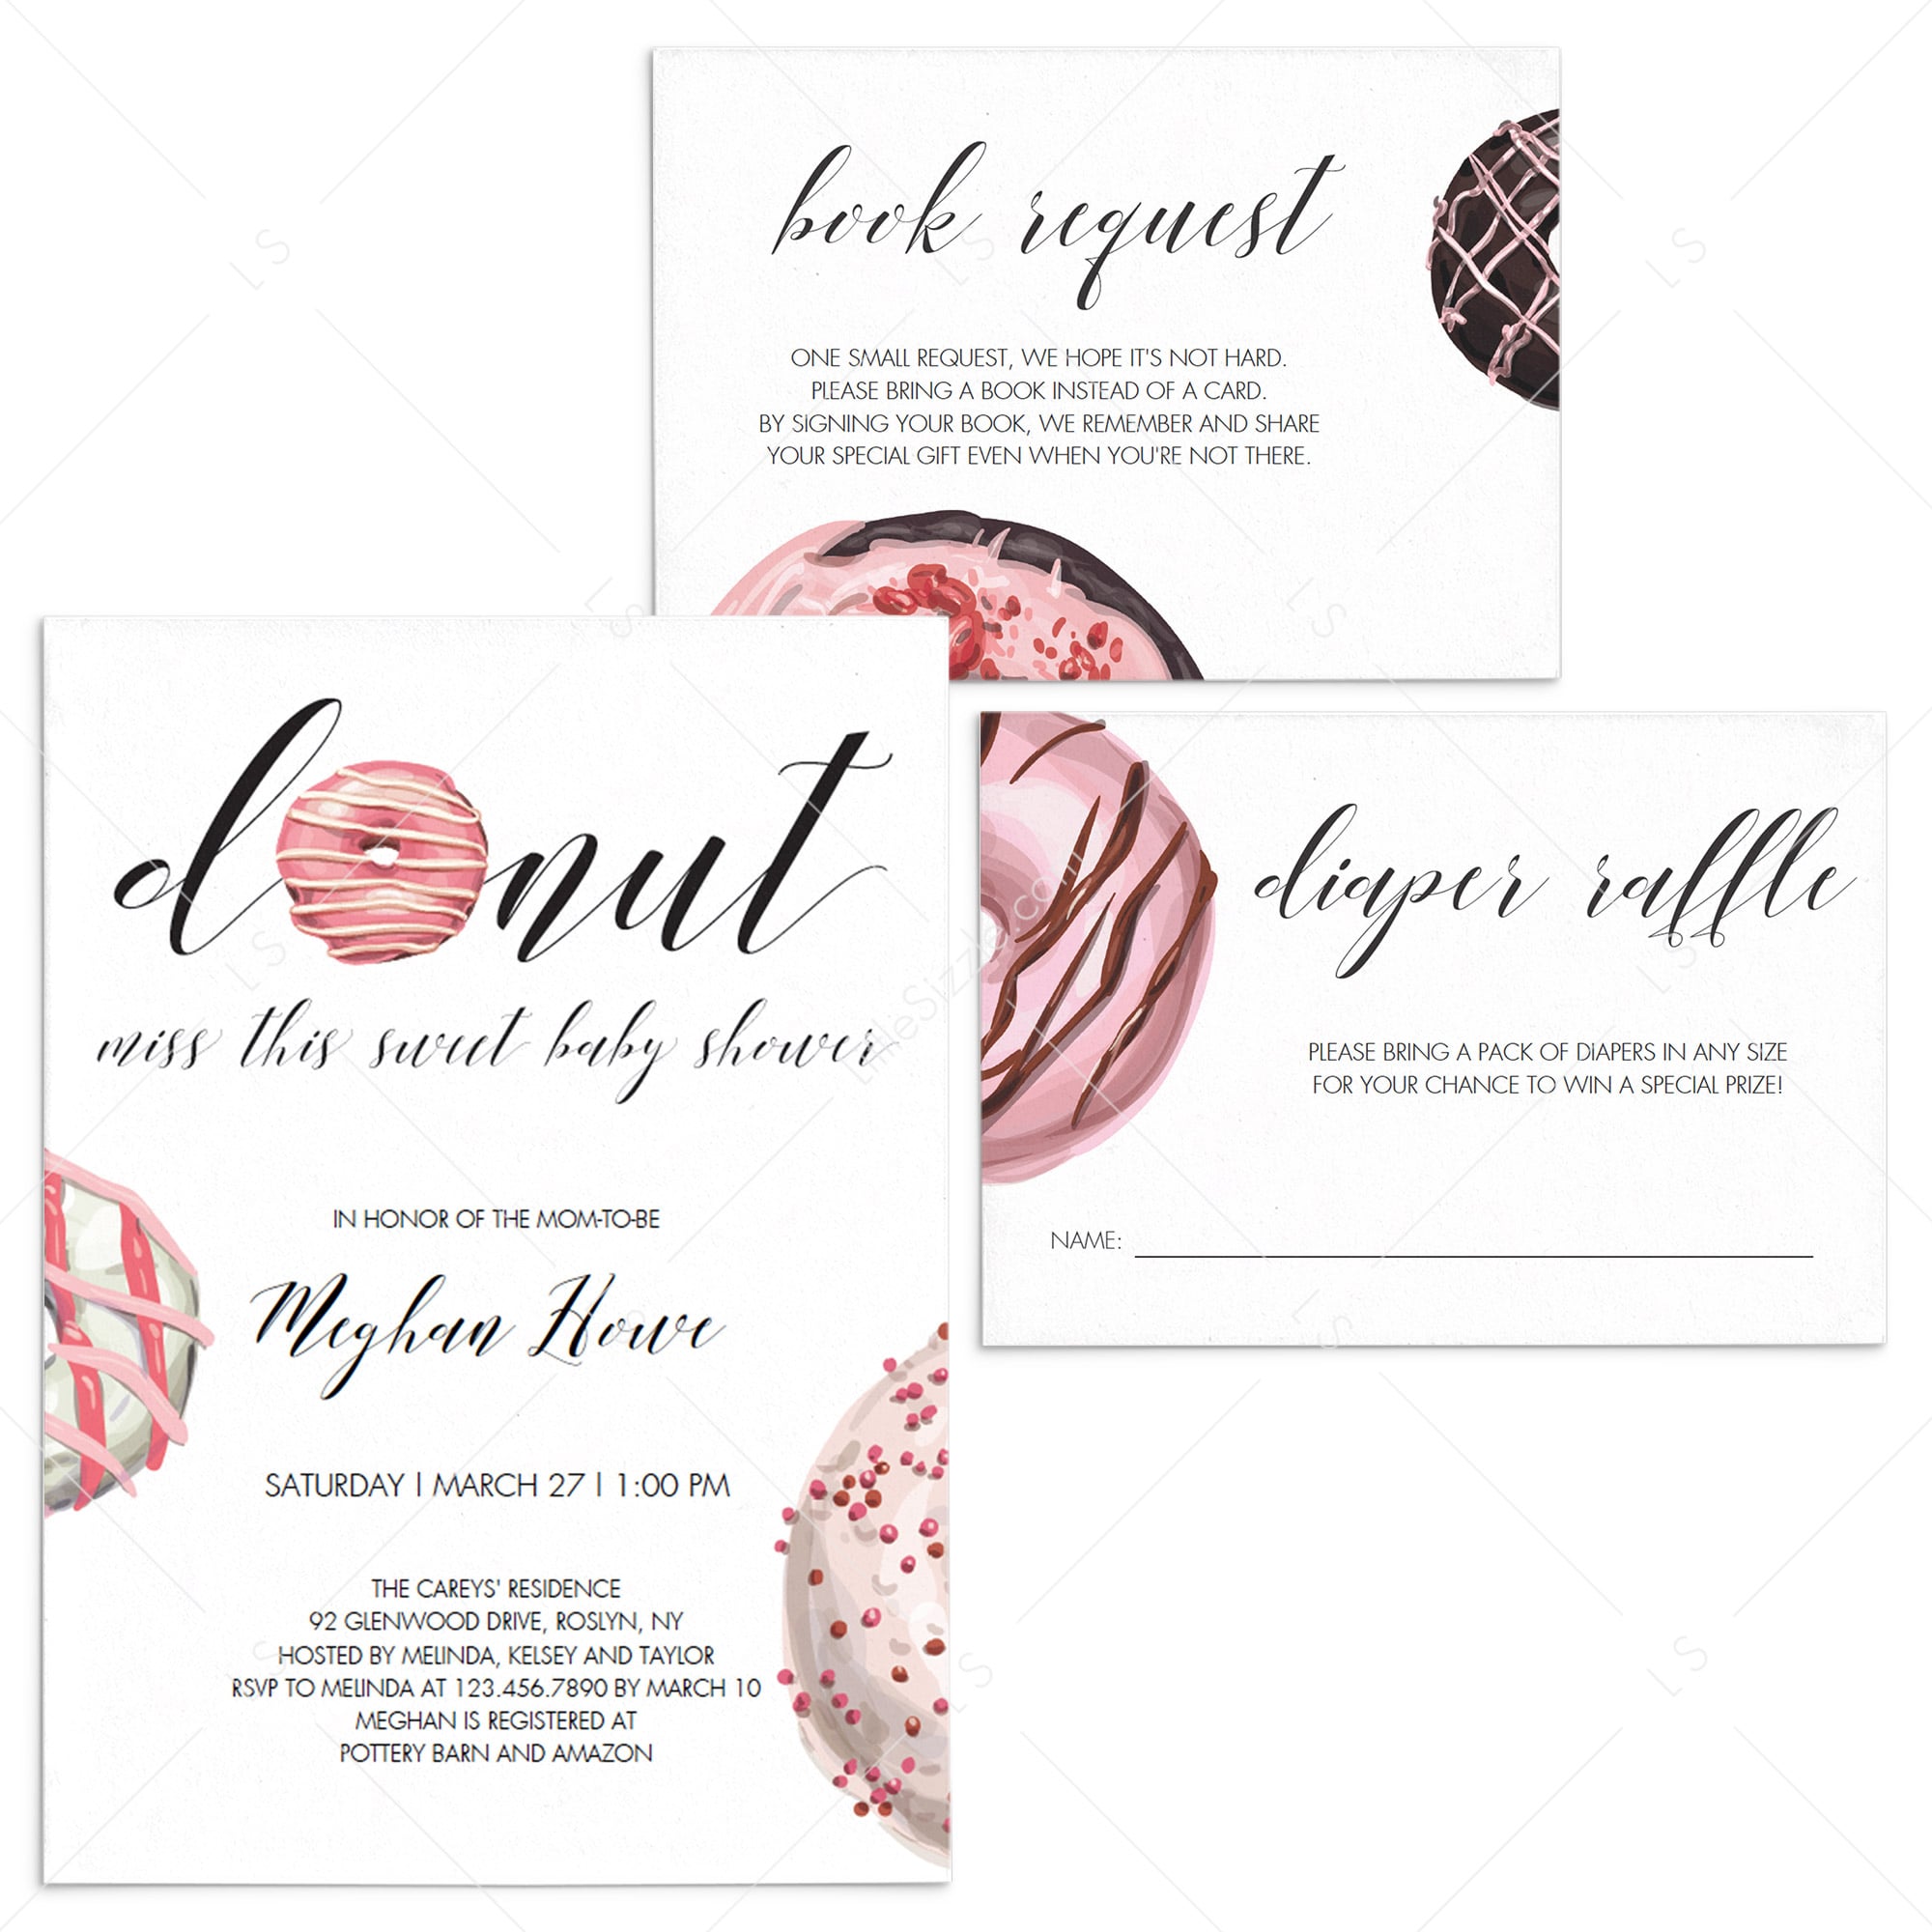 Donut theme baby shower invitation set templates for girl by LittleSizzle